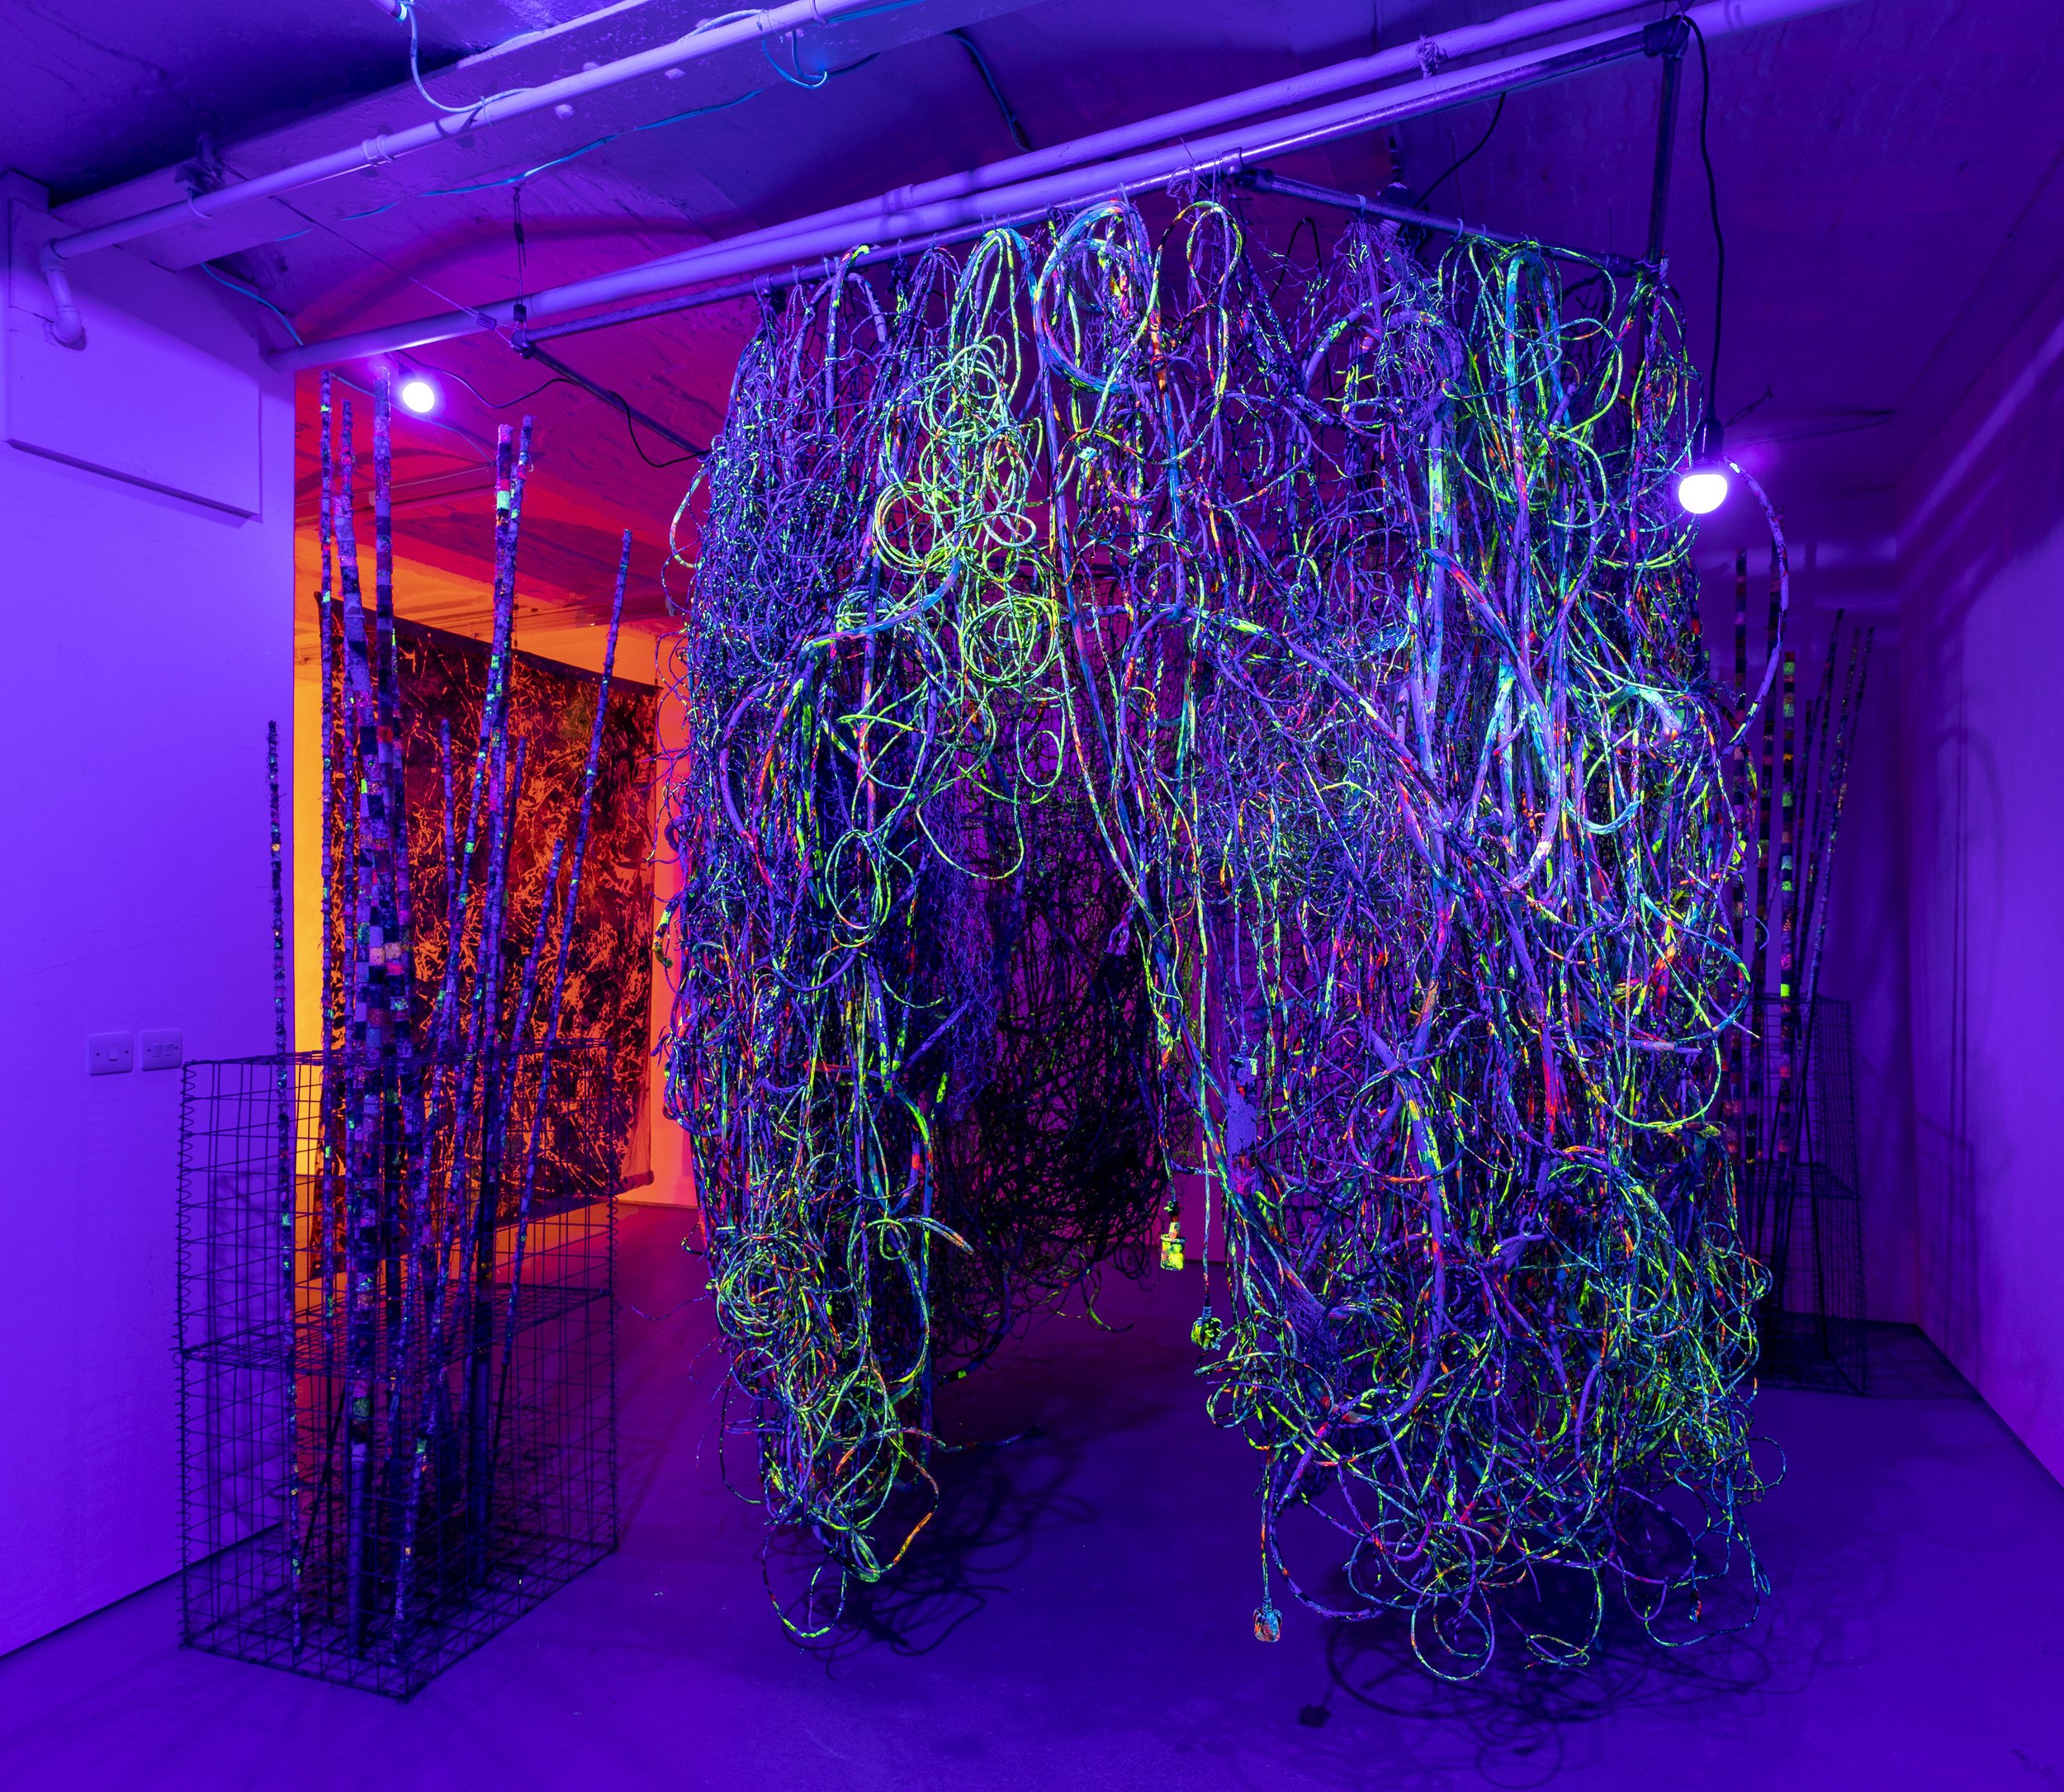   Children of the Rave   Gleaned electrical wires, ropes and PVC tubes weaved into polyethylene nets and steel fencing, with UV installation  270 x 230 x 230cm  Part of the  Ghost Notes  duo presentation with Carolina Aguirre, at Fold Gallery, London